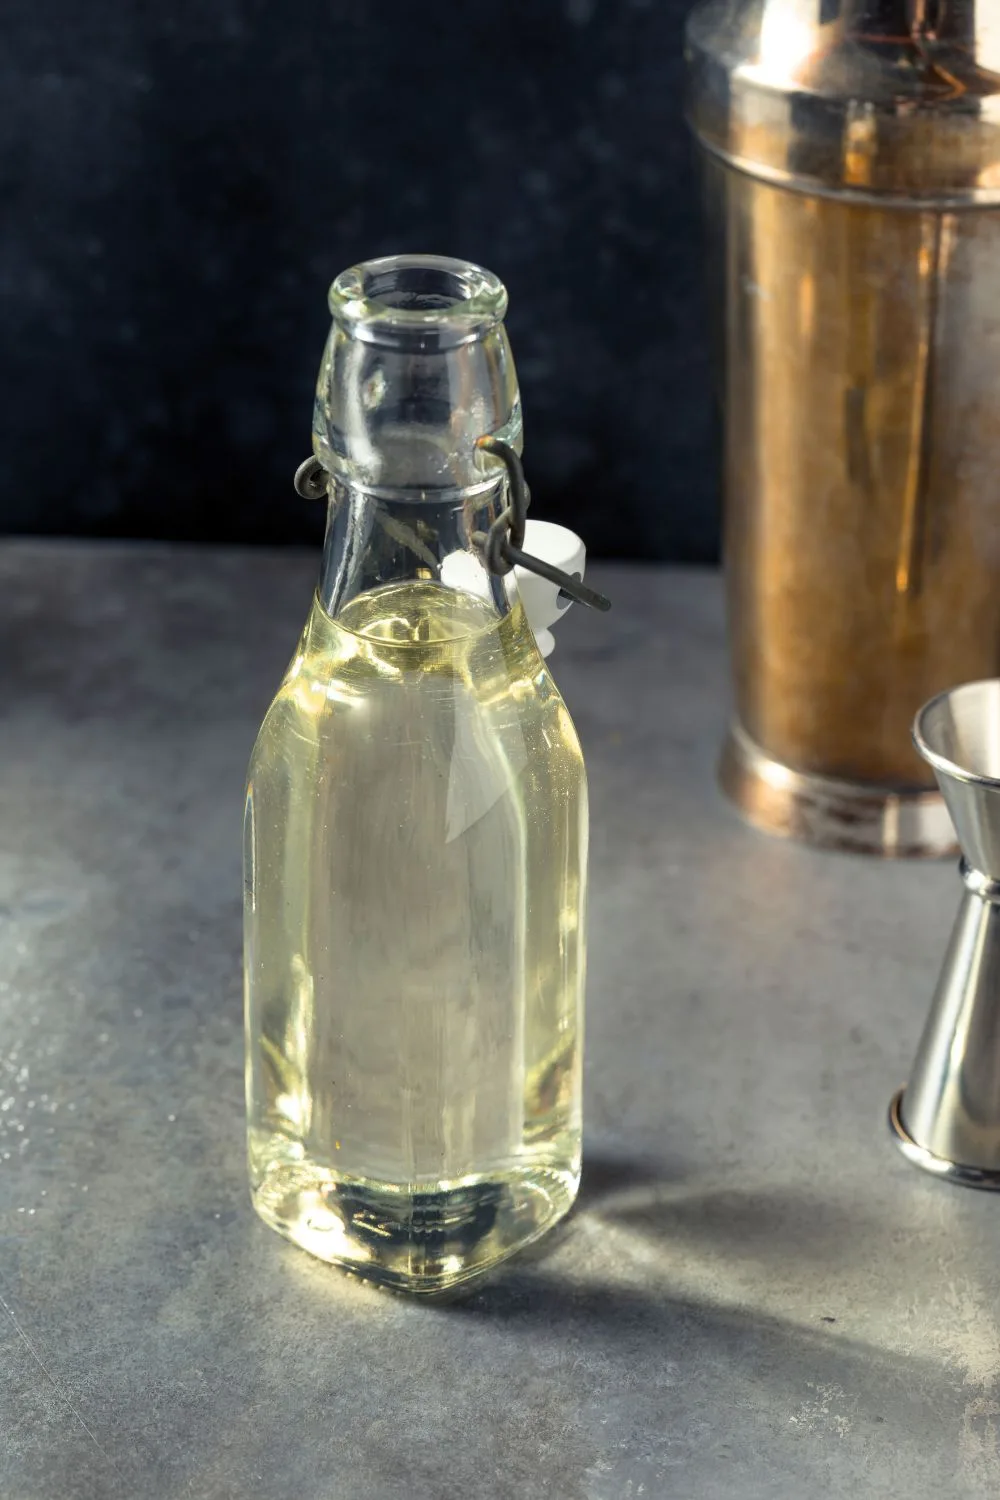 simple syrup uses and recipes